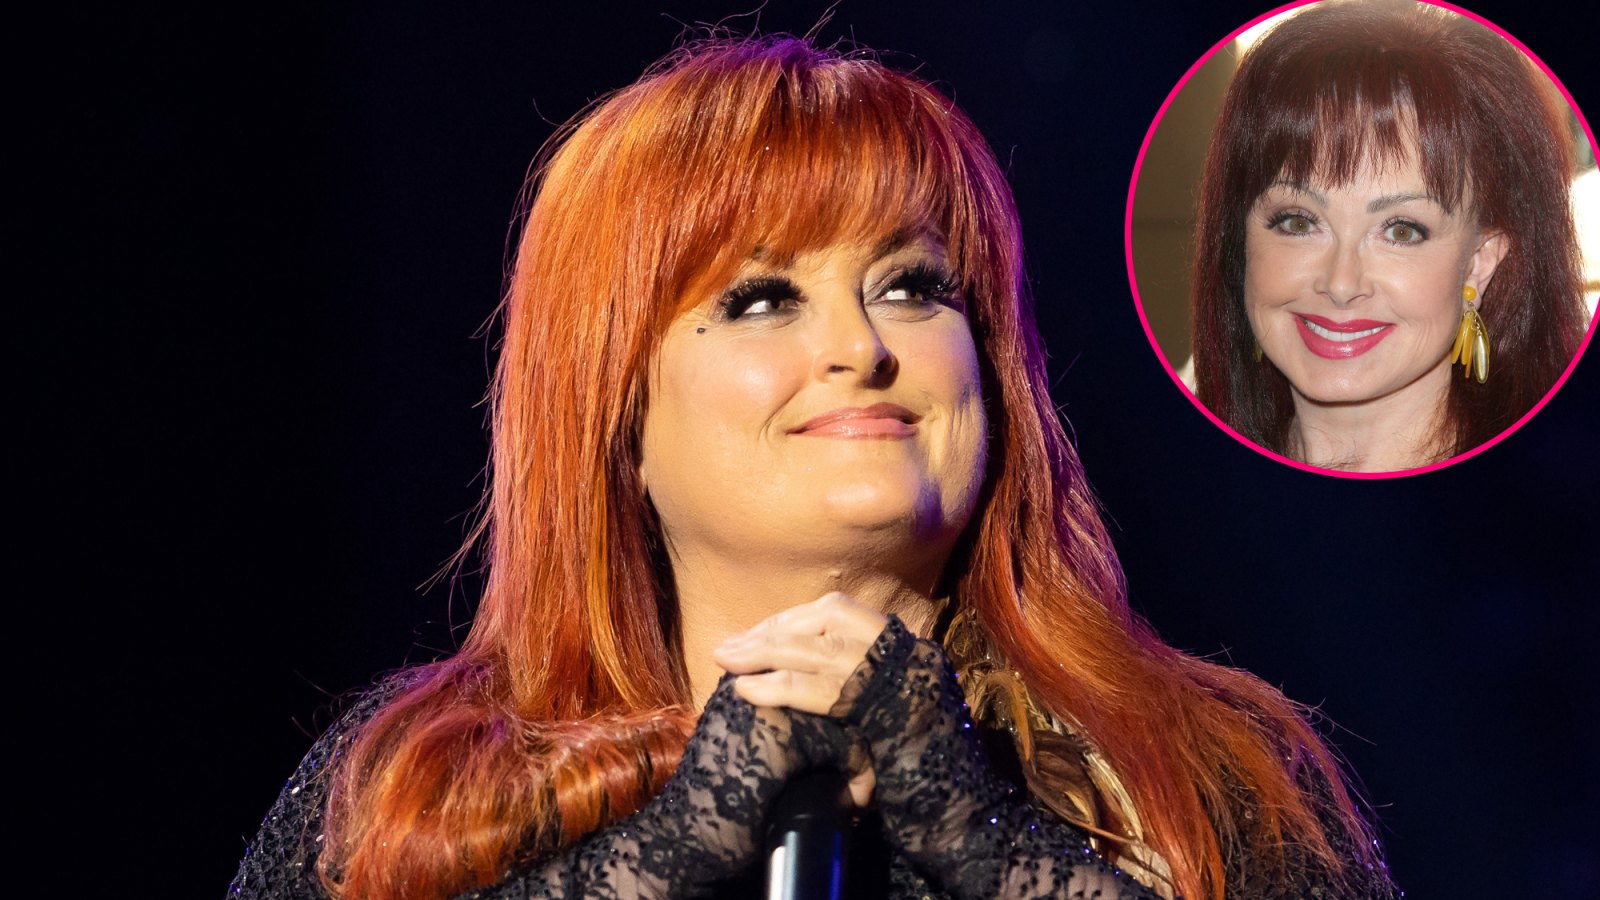 Wynonna Judd Sings The Judds' 'Why Not Me' During Surprise CMA Fest Tribute to Late Mom Naomi: 'Carrying the Torch'